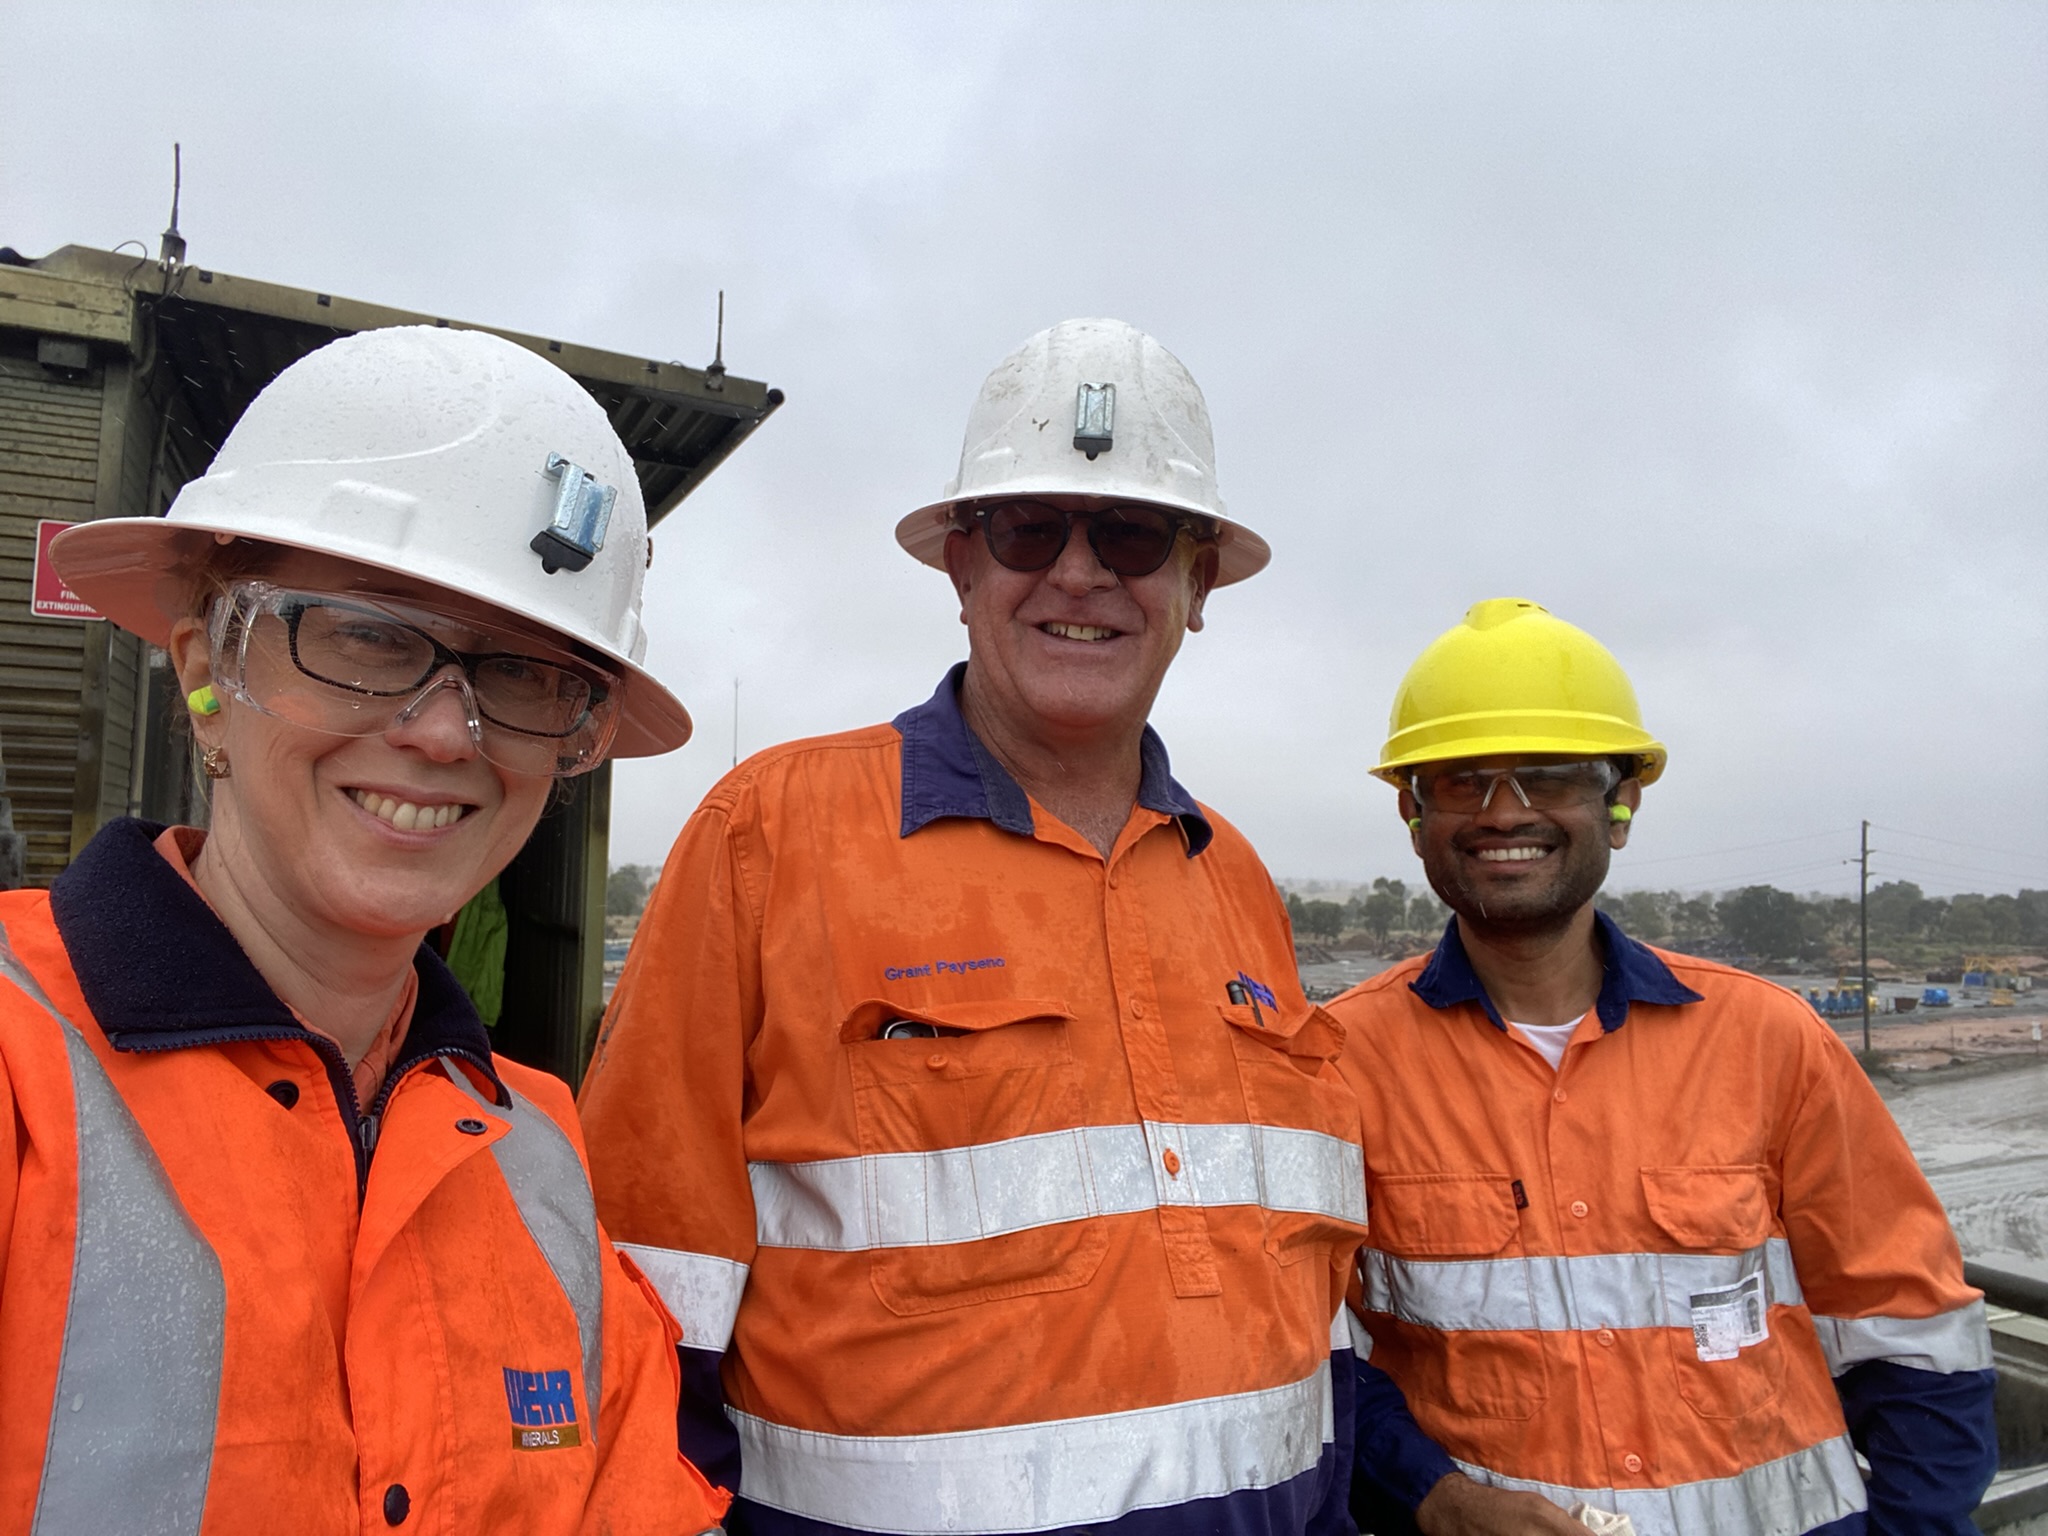 Image: Trudi at Copper mine in NSW with colleagues Grant Payseno and Nirmal Weerakesara